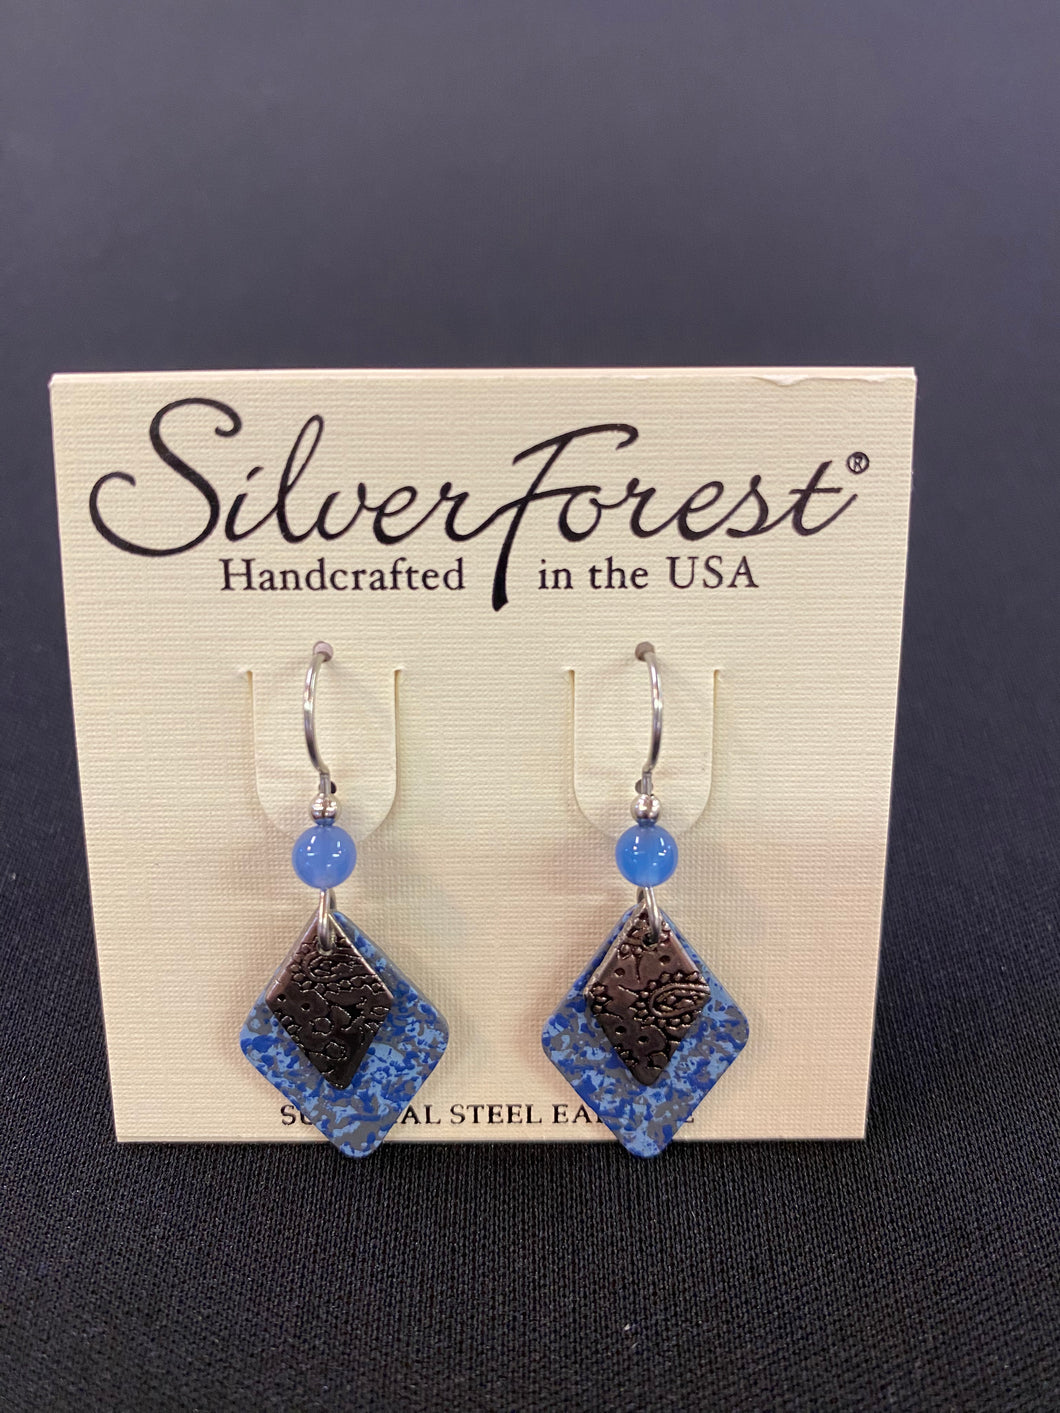 $18 Silver Forest Handcrafted Earrings